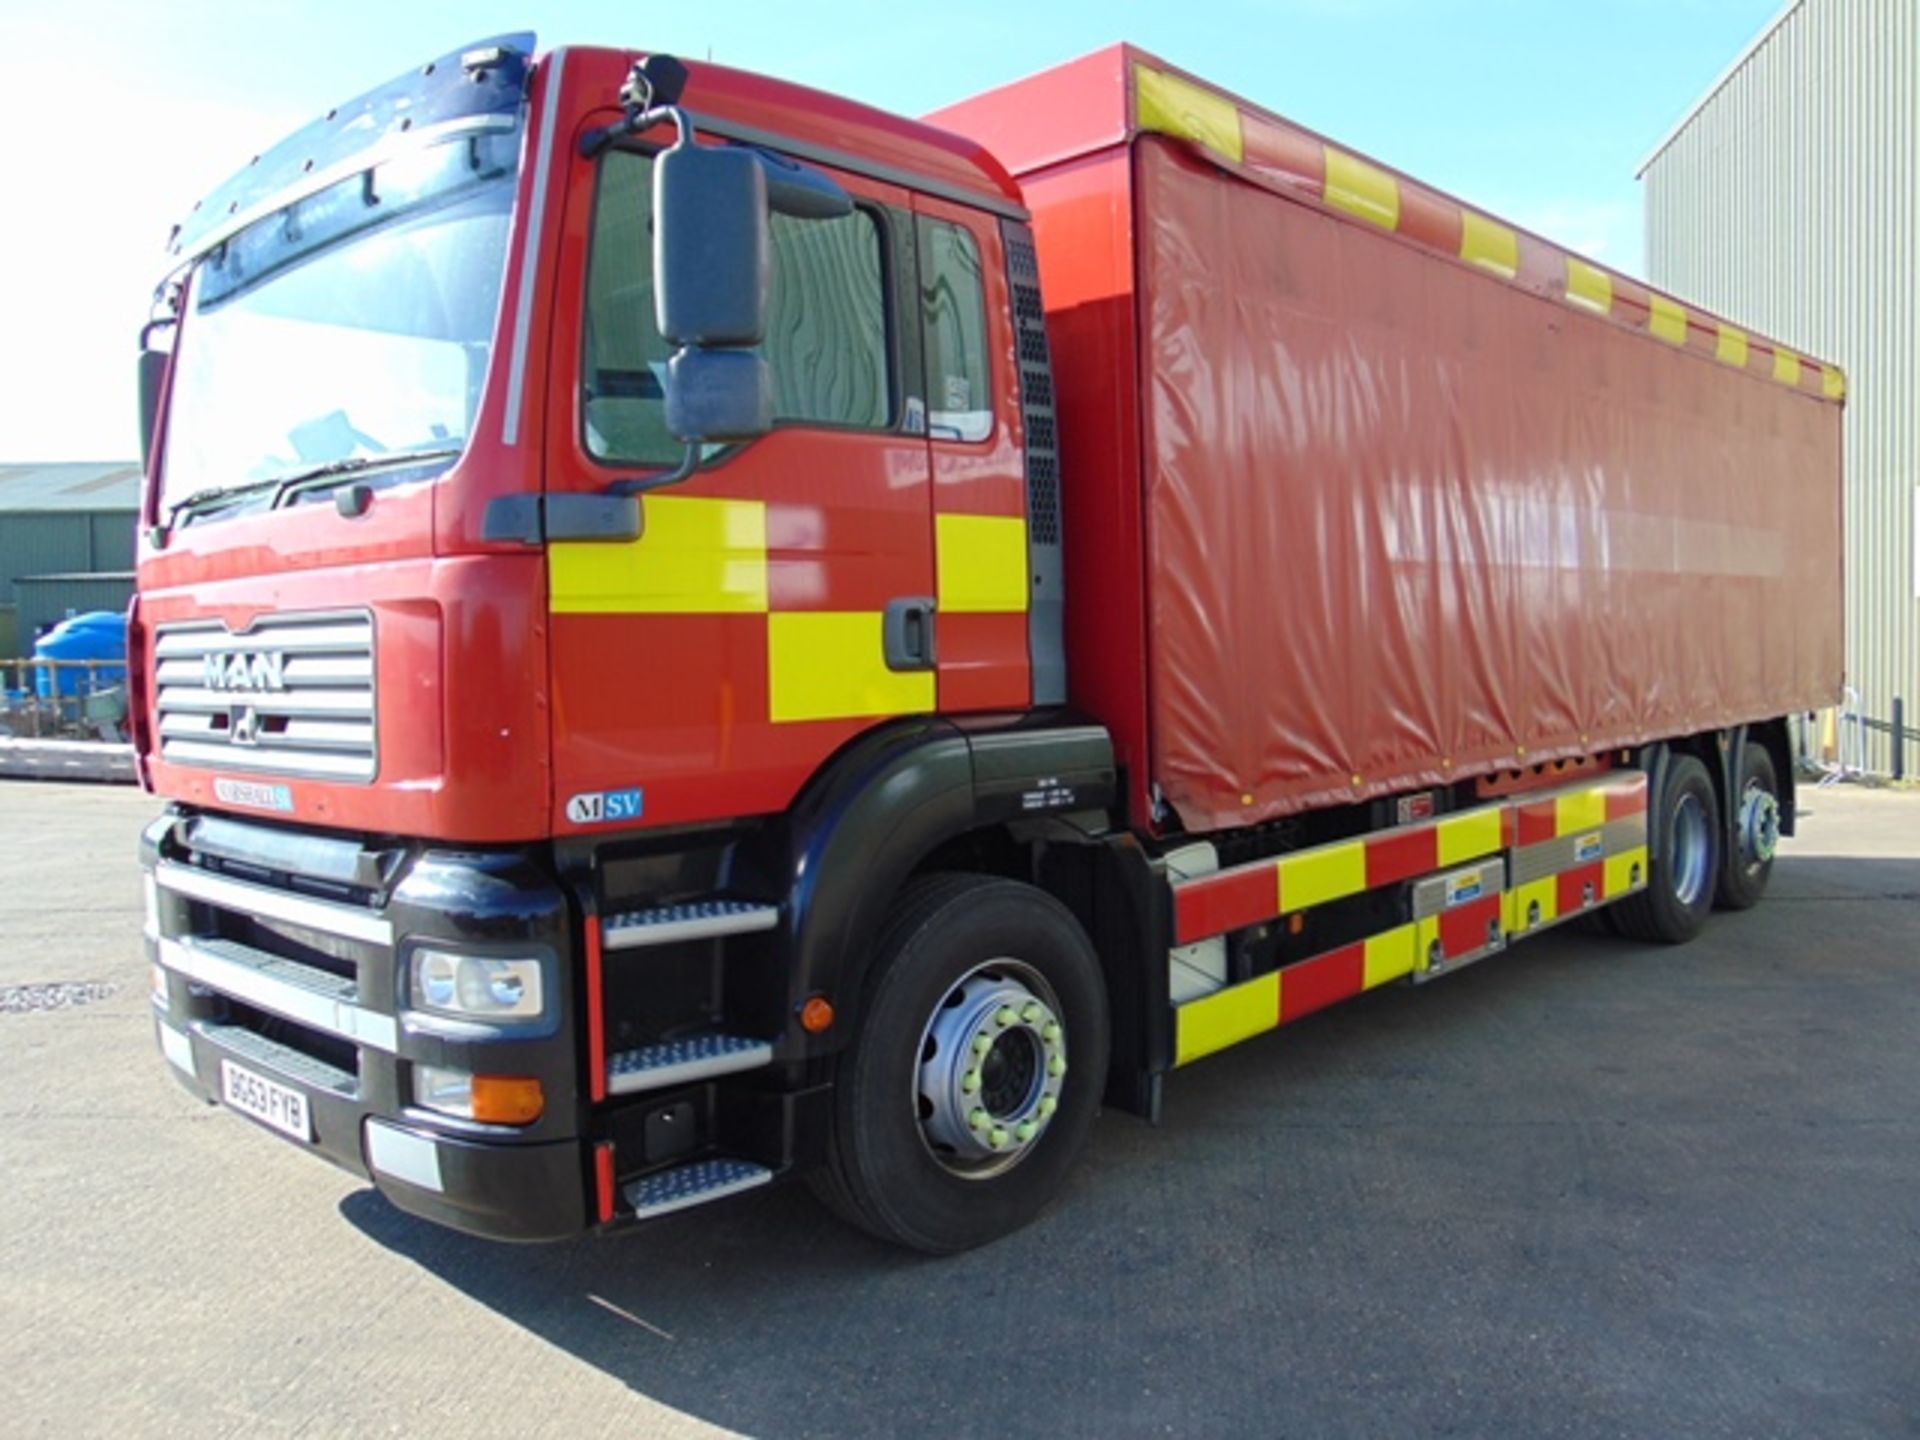 2003 MAN TG-A 6x2 Rear Steer Incident Support Unit - Image 4 of 27